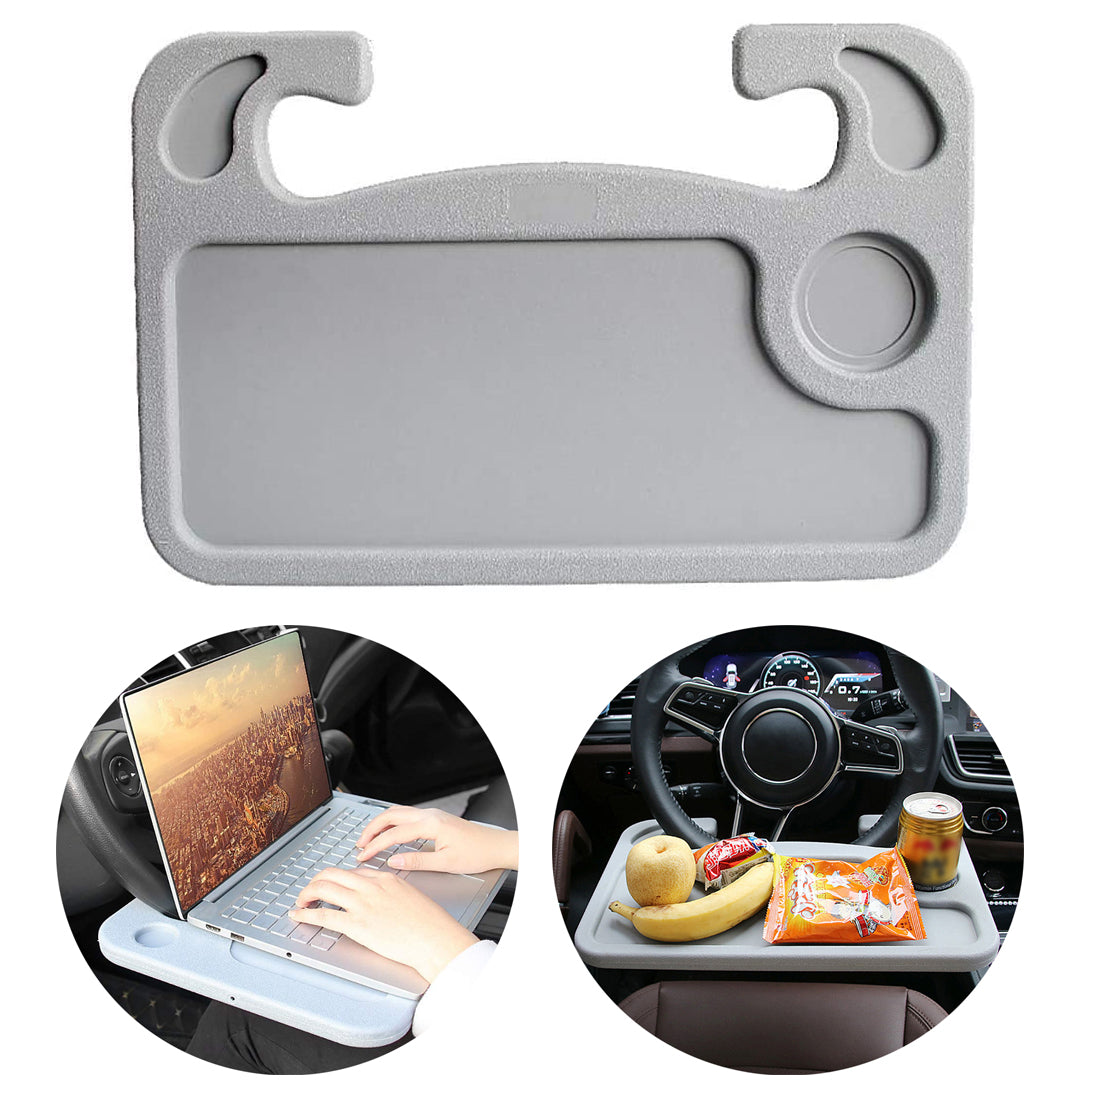 Furulu Multifunctional Foldable Car Steering Wheel Back Seat Tray Table Desk  Mount with Drawer For Tablet PC 